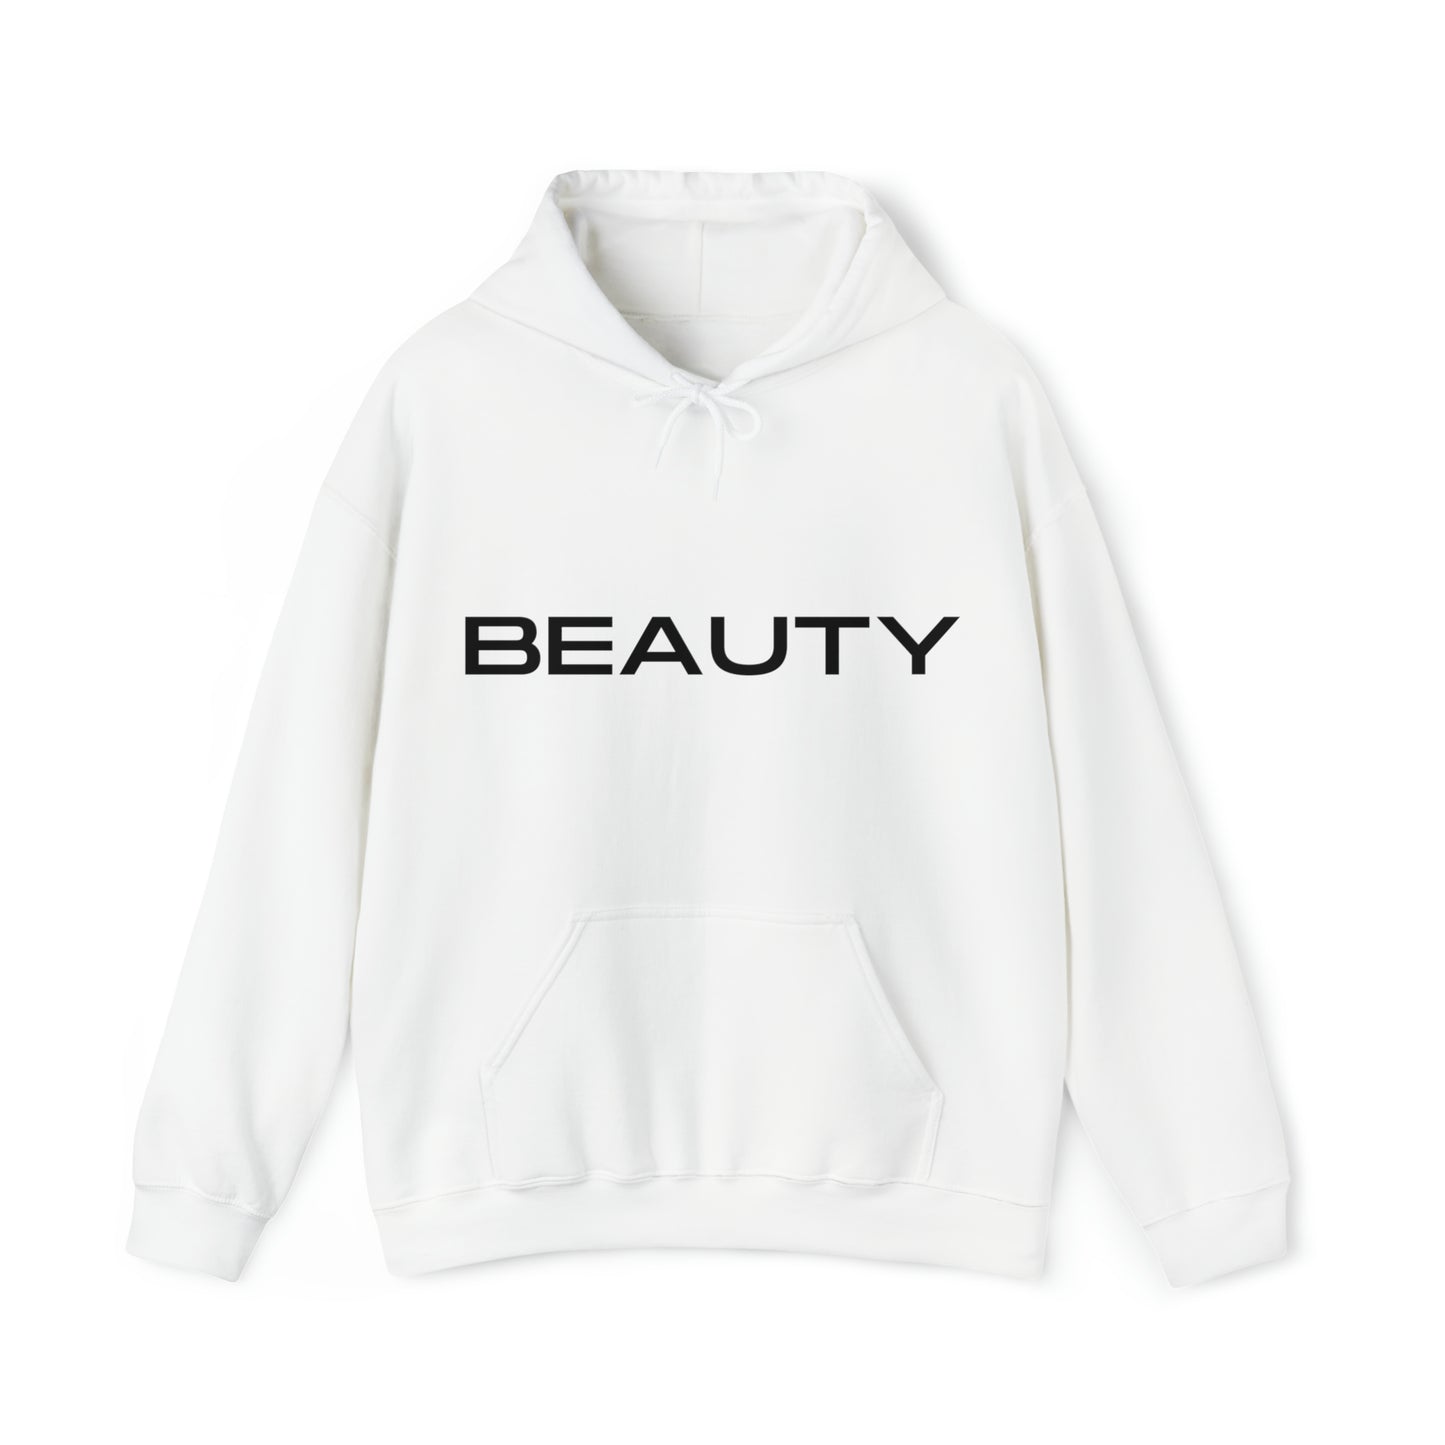 Beauty Graphic Hoodie Women Inspirational Statement Apparel Black Apparel Clothing